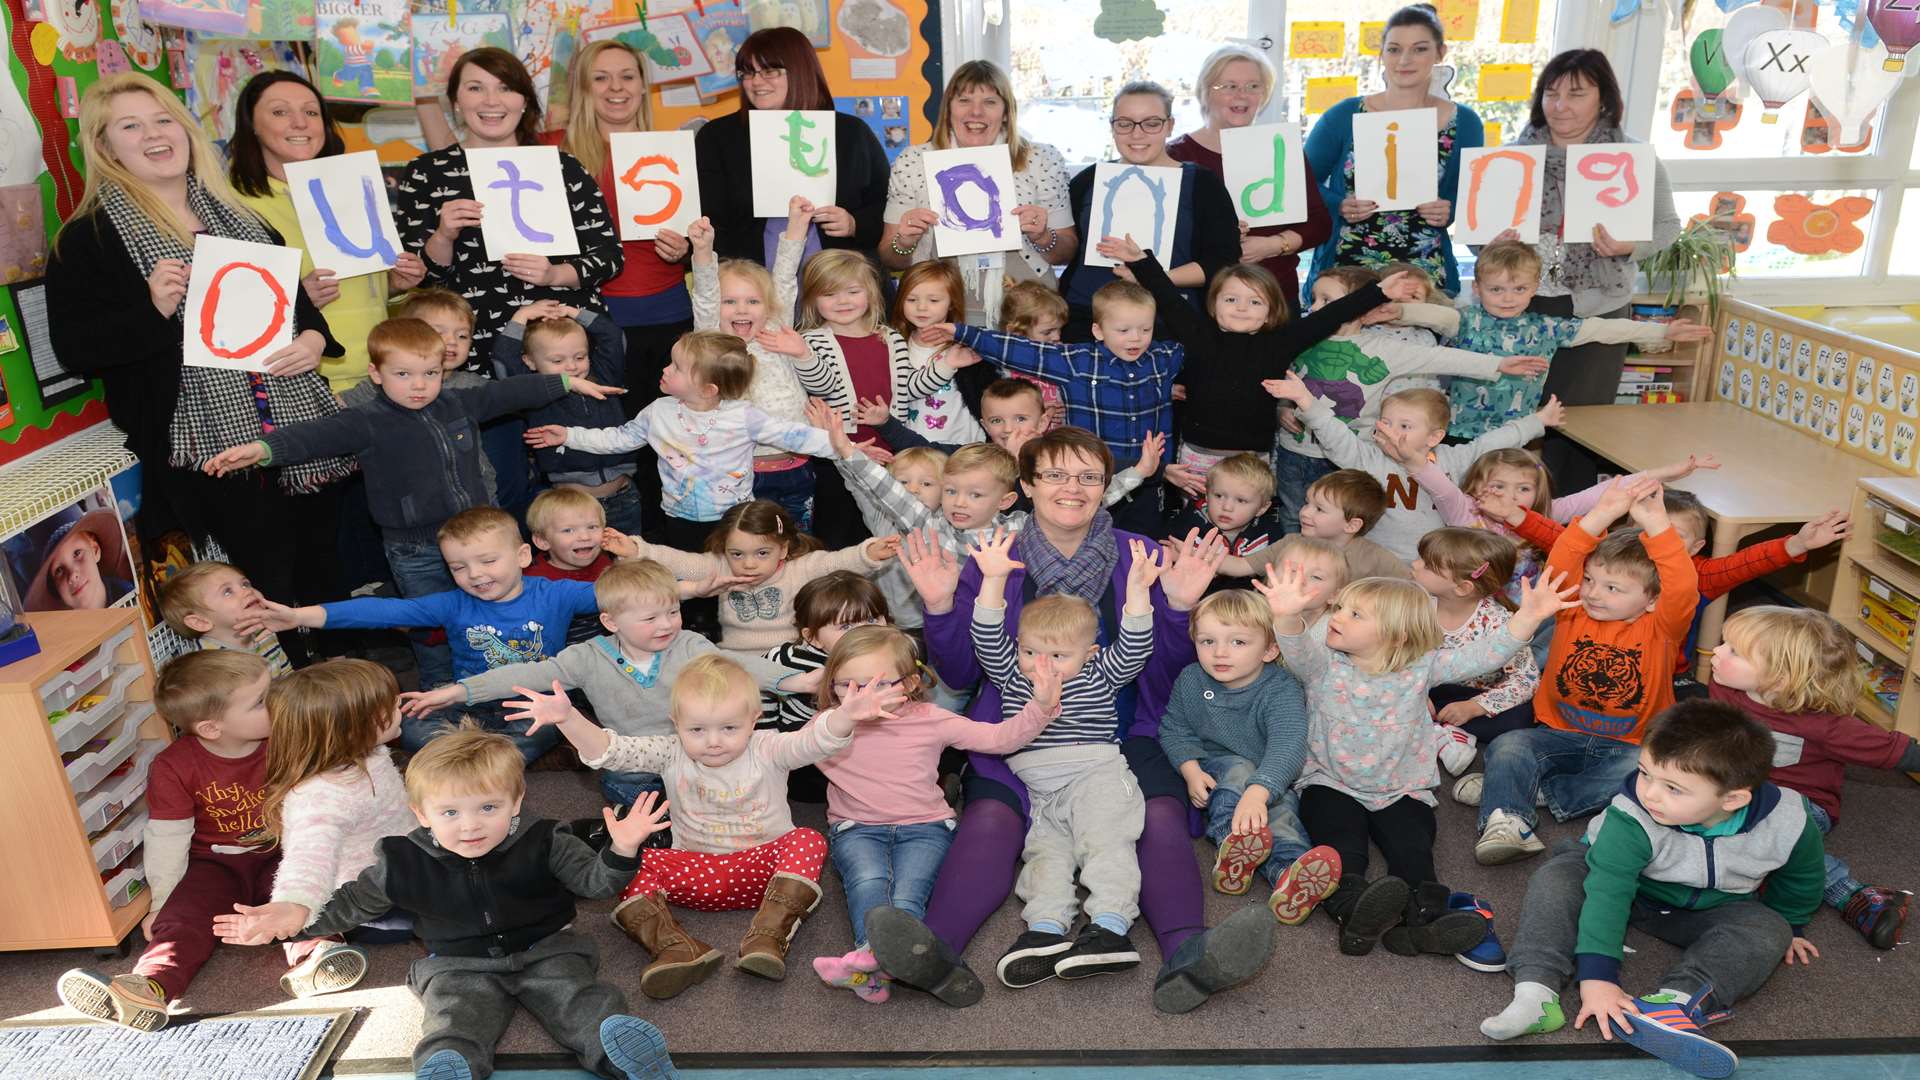 Outstanding - another top Ofsted report for the Abacus nursery in New Romney.